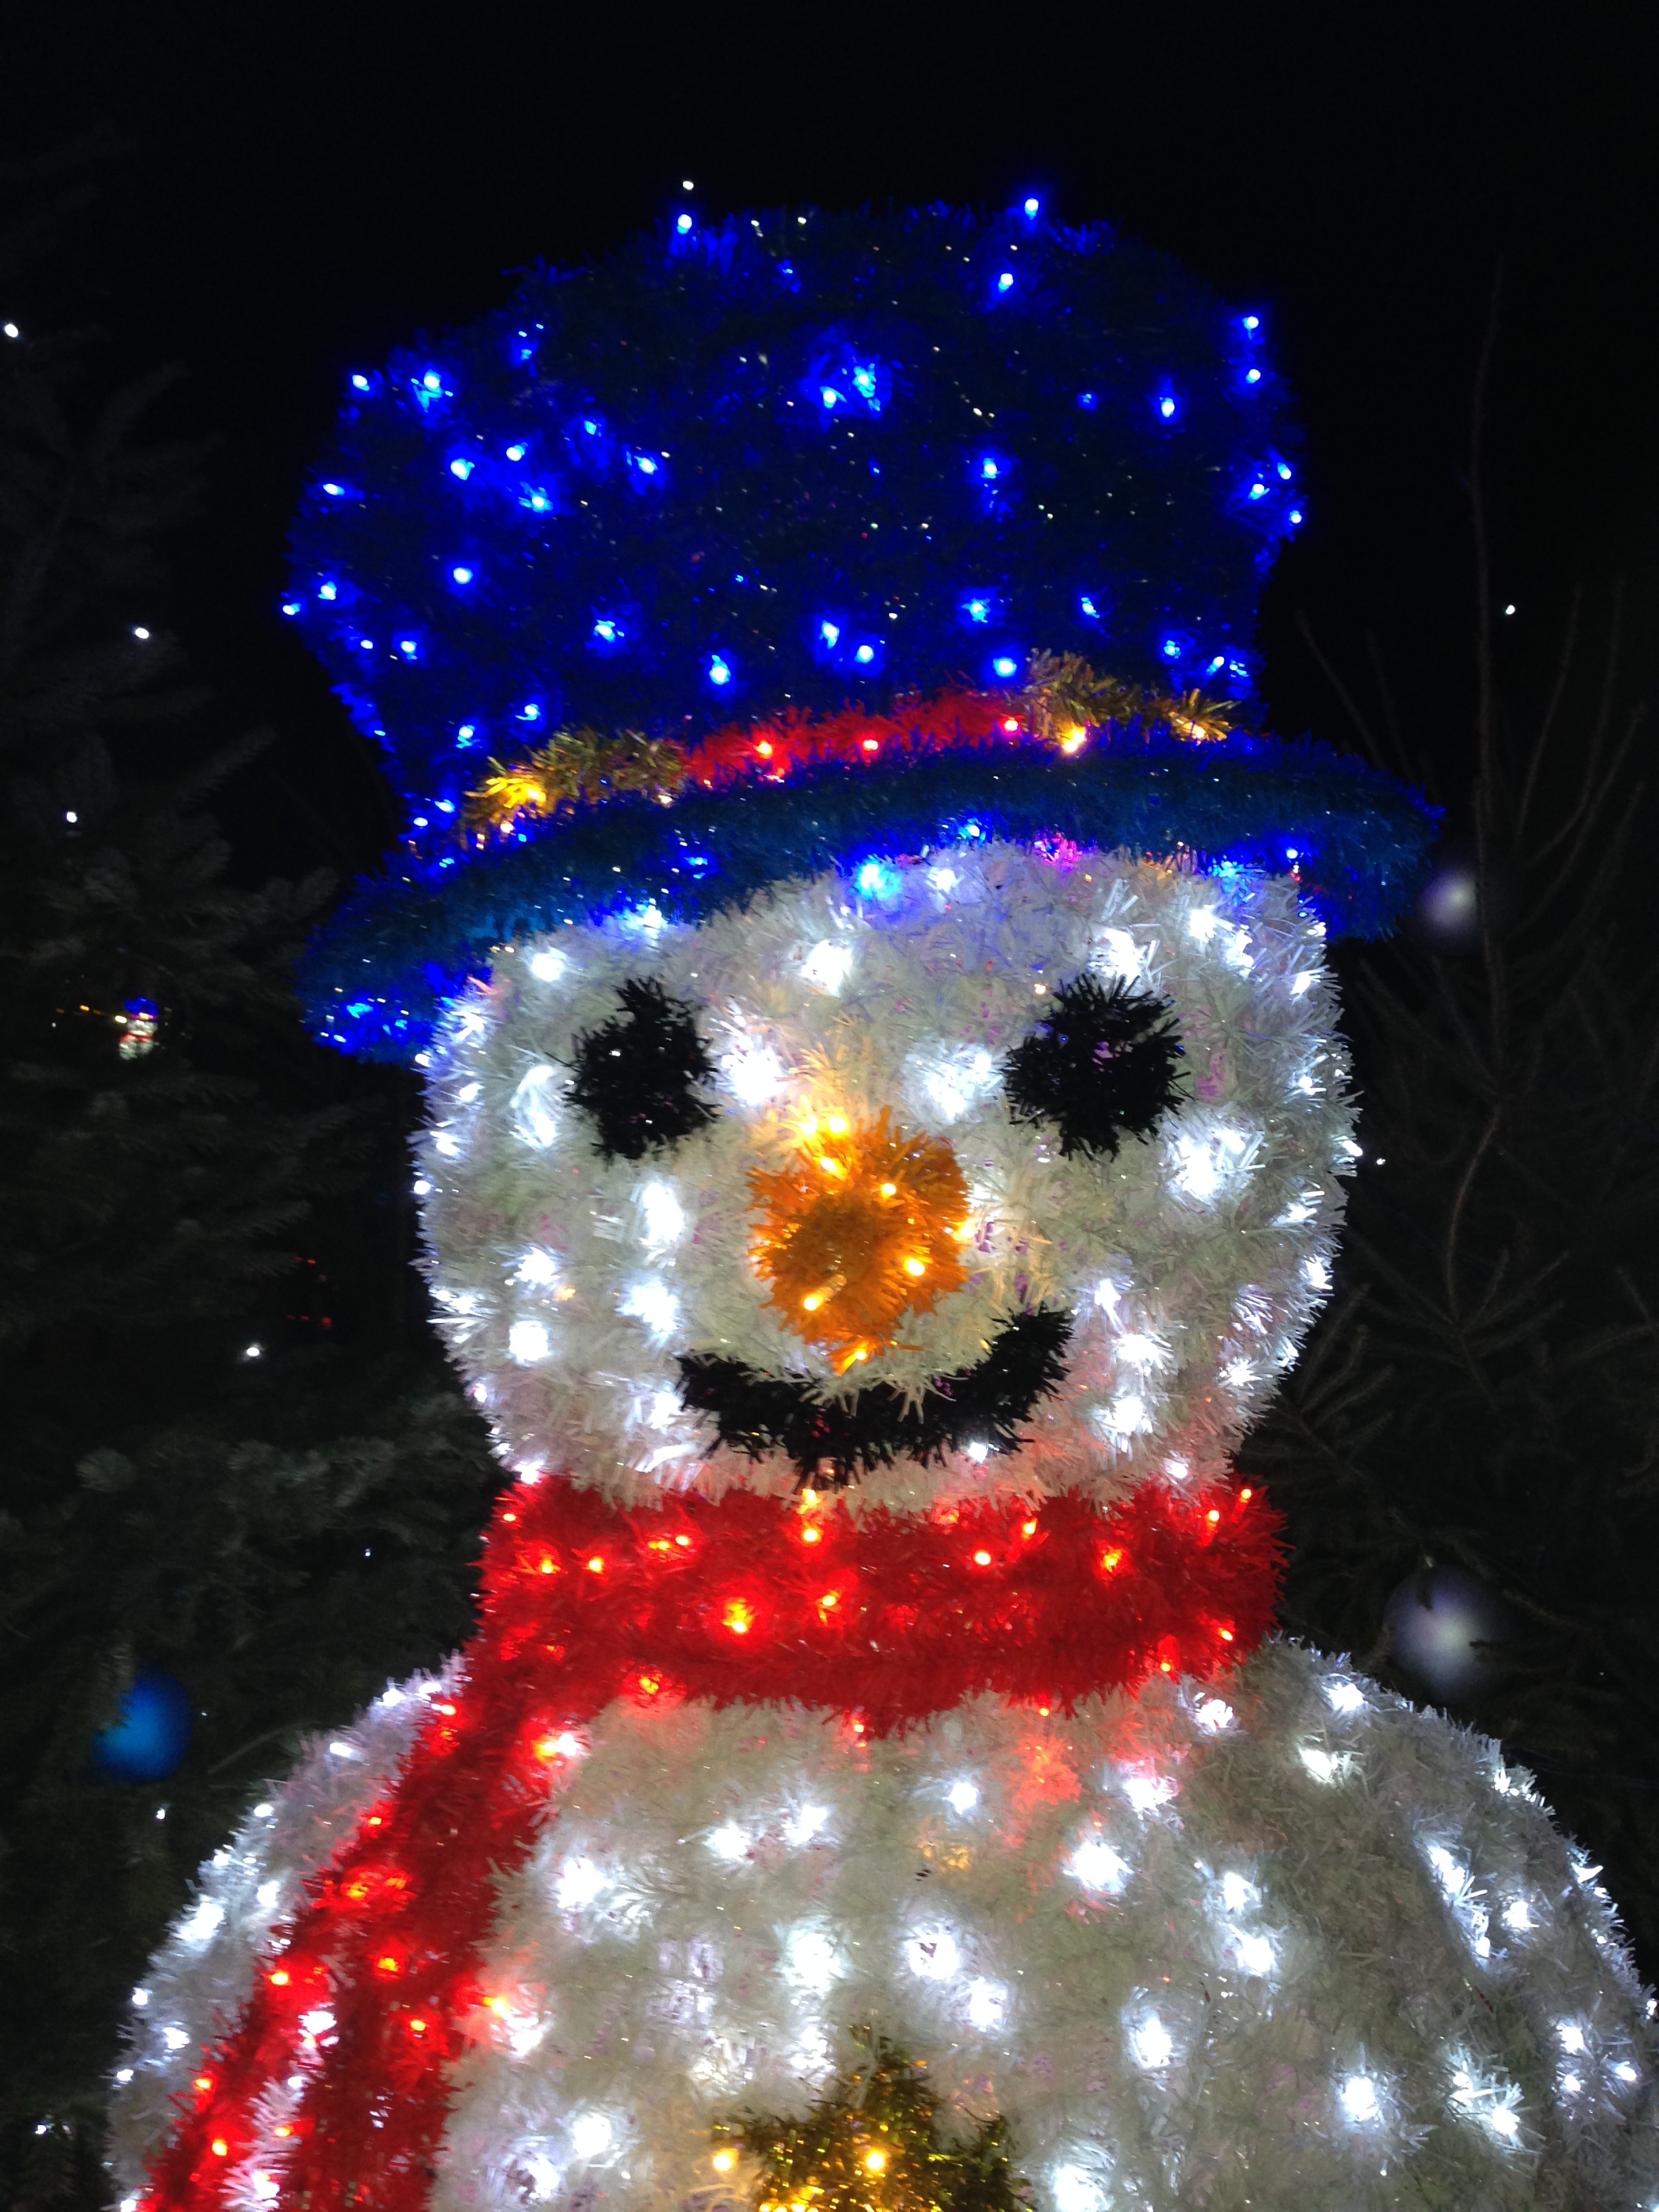 white blue and red snowman with scarf and hat statue